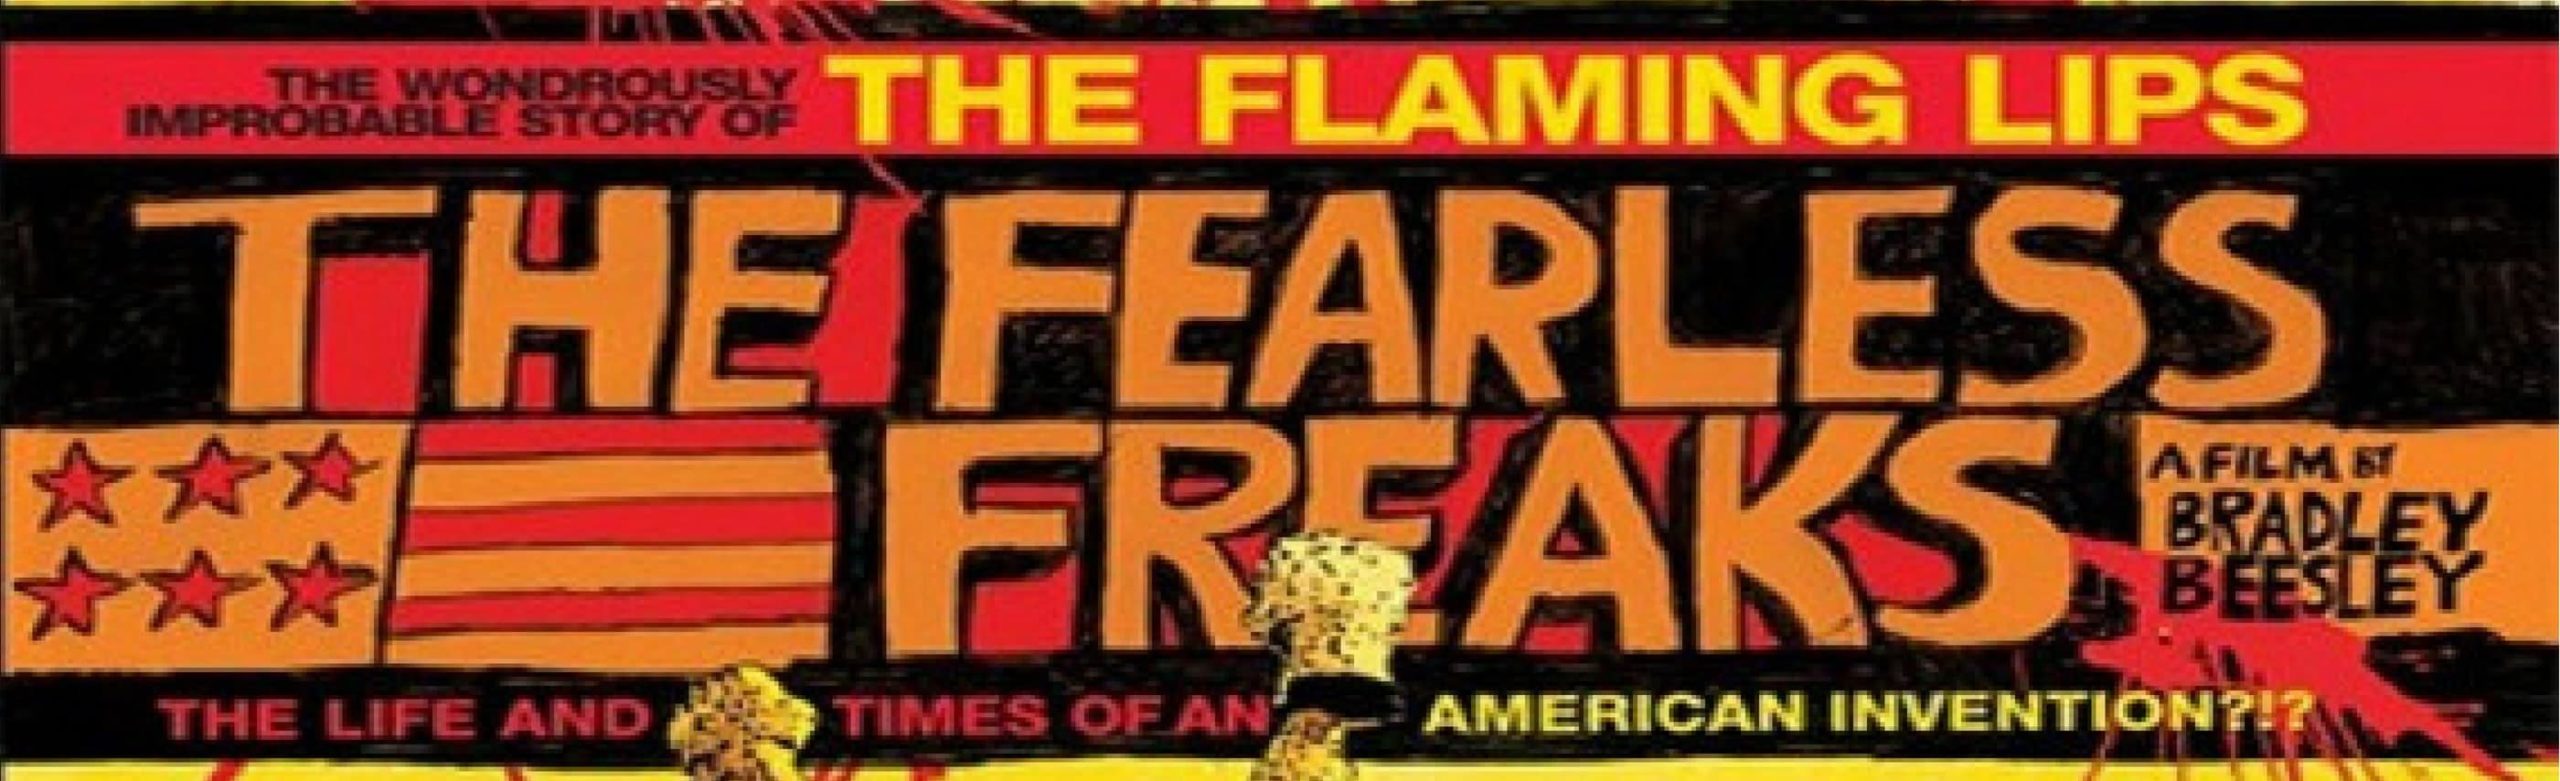 Flaming Lips Biopic “The Fearless Freaks” to Screen at Roxy for Trail Movie Night Image